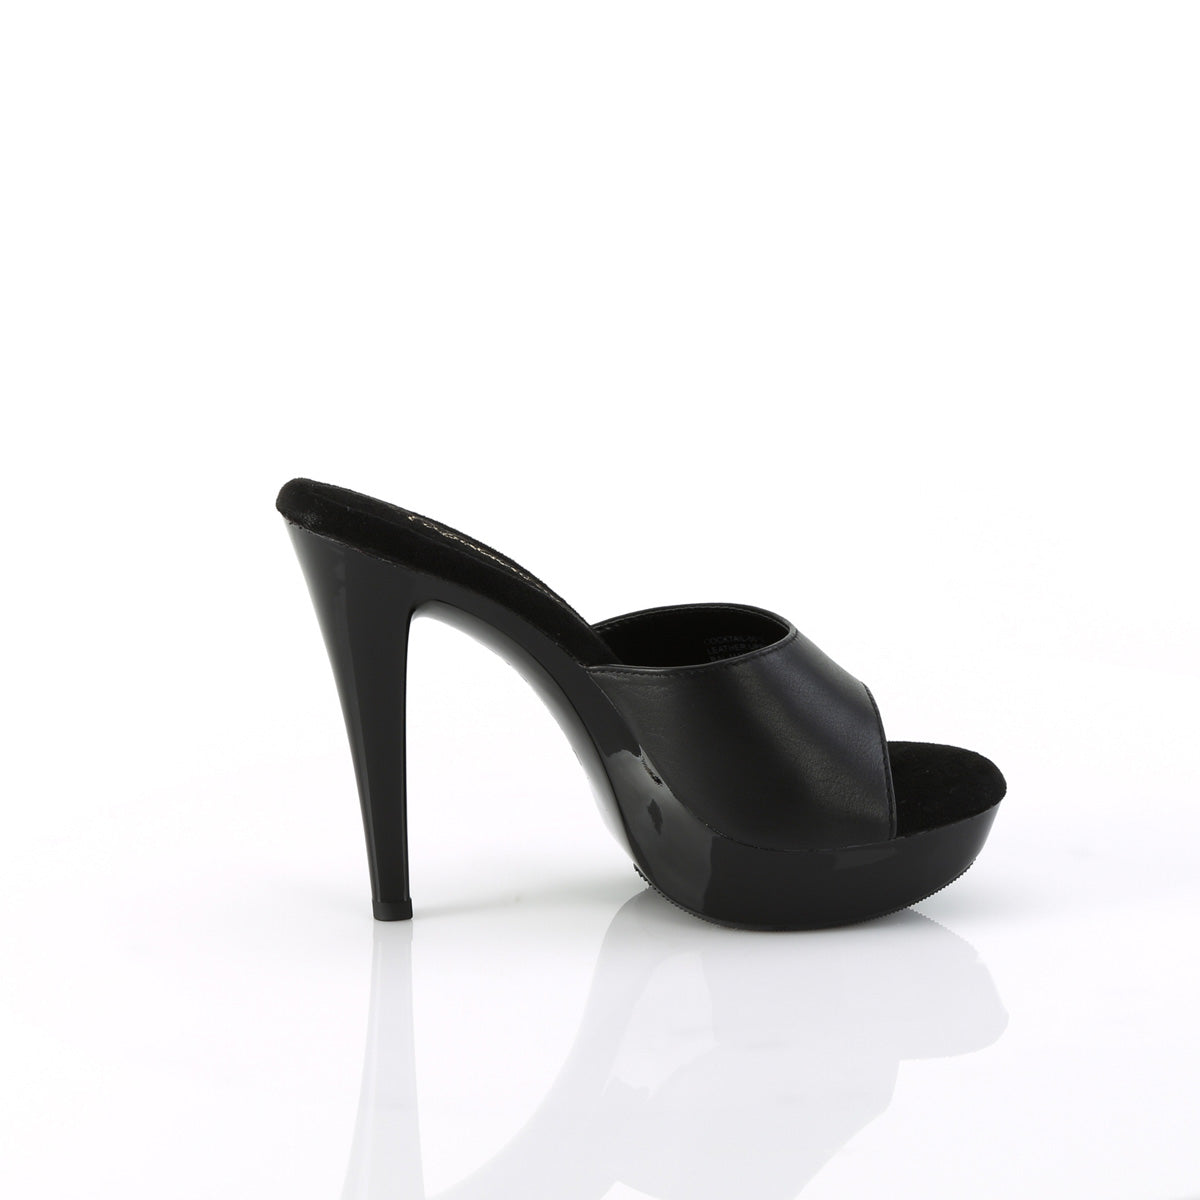 COCKTAIL-501L Fabulicious Black Leather/Black Shoes [Sexy Shoes]